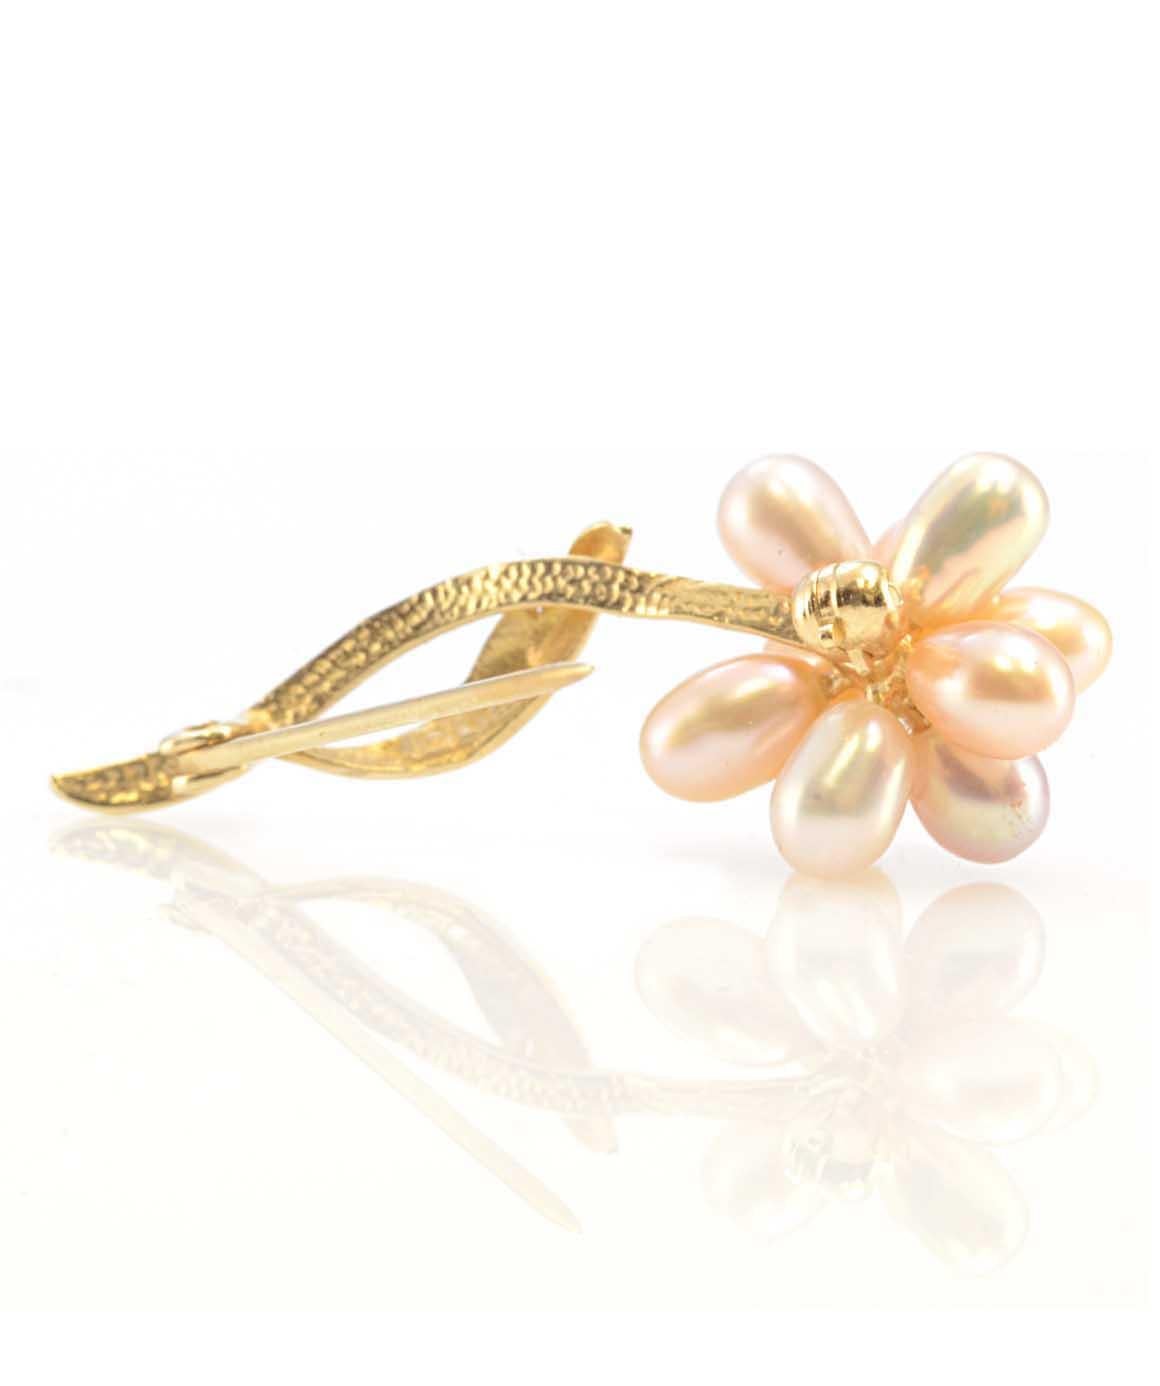 Women's or Men's Solid 14 Karat Yellow Gold Pearl and Diamond Flower Pin 2.5g